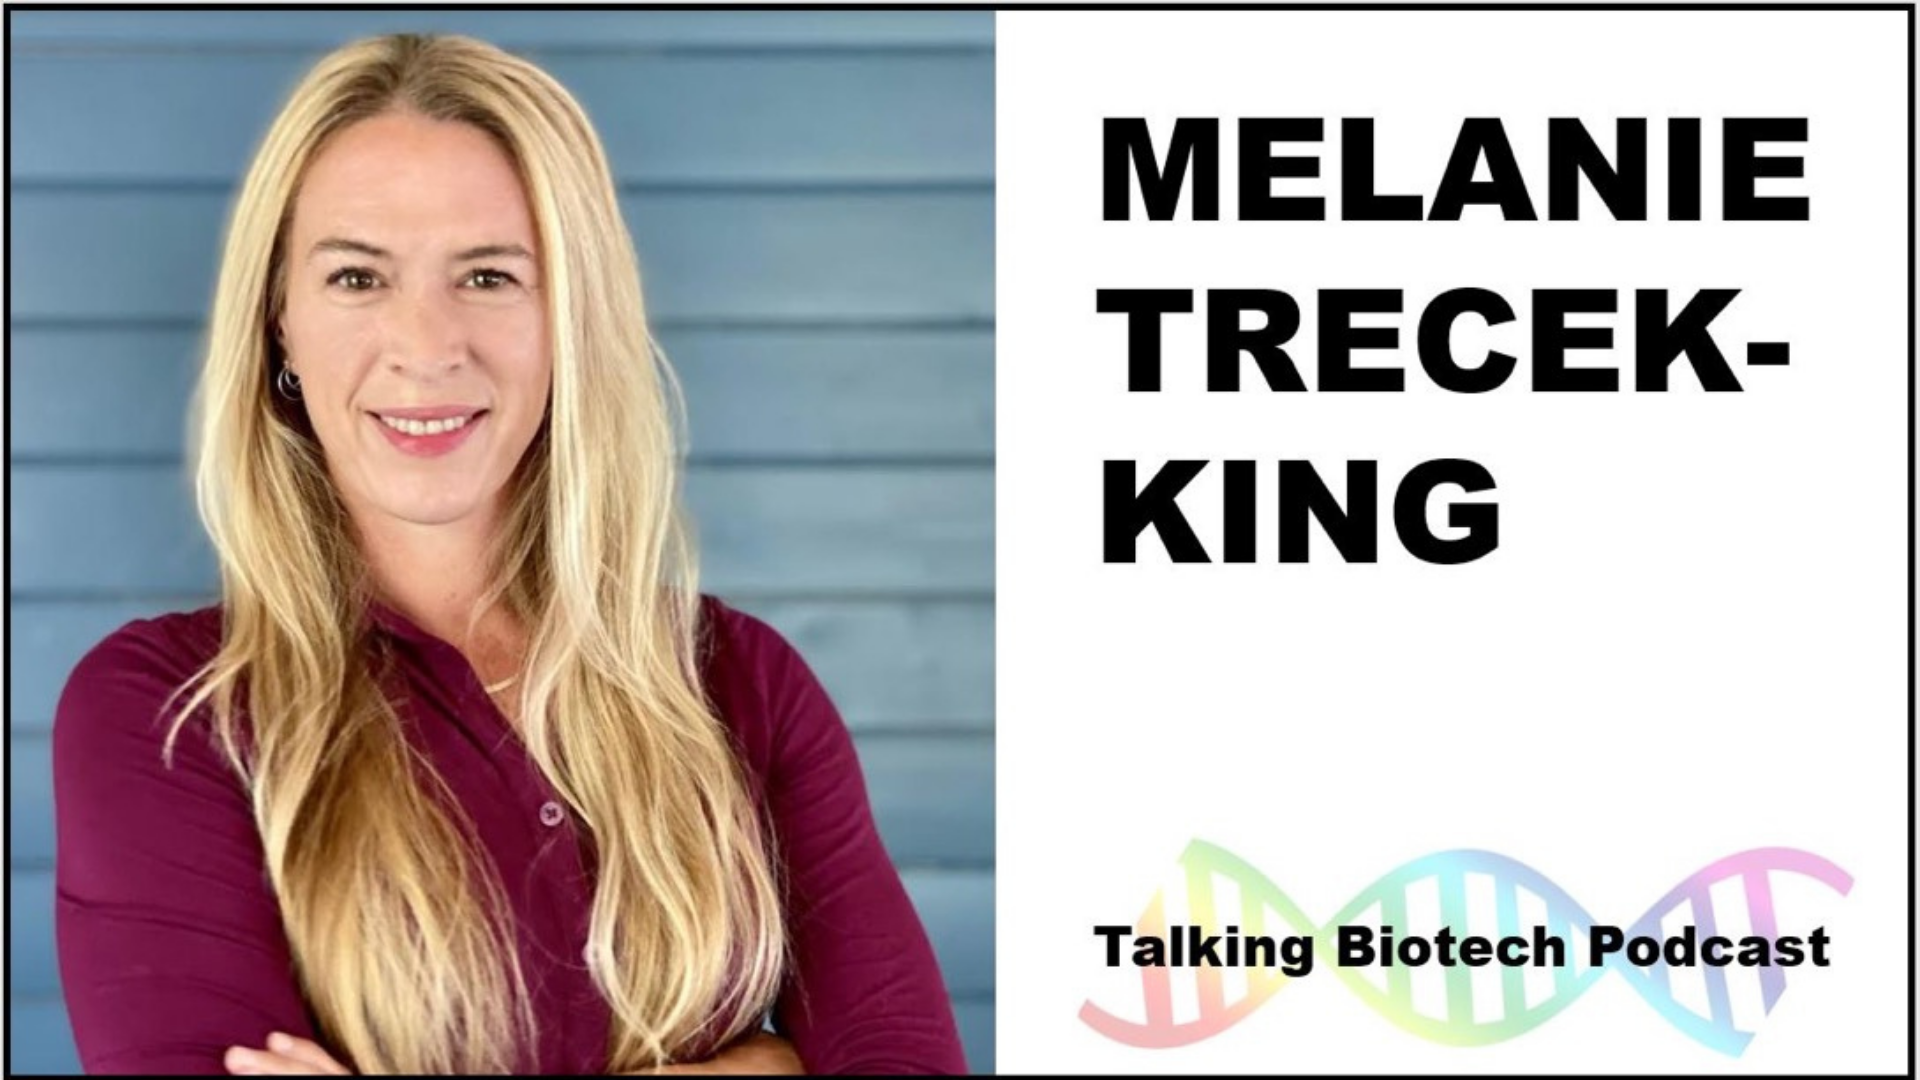 Thinking Is Power on Talking Biotech Podcast